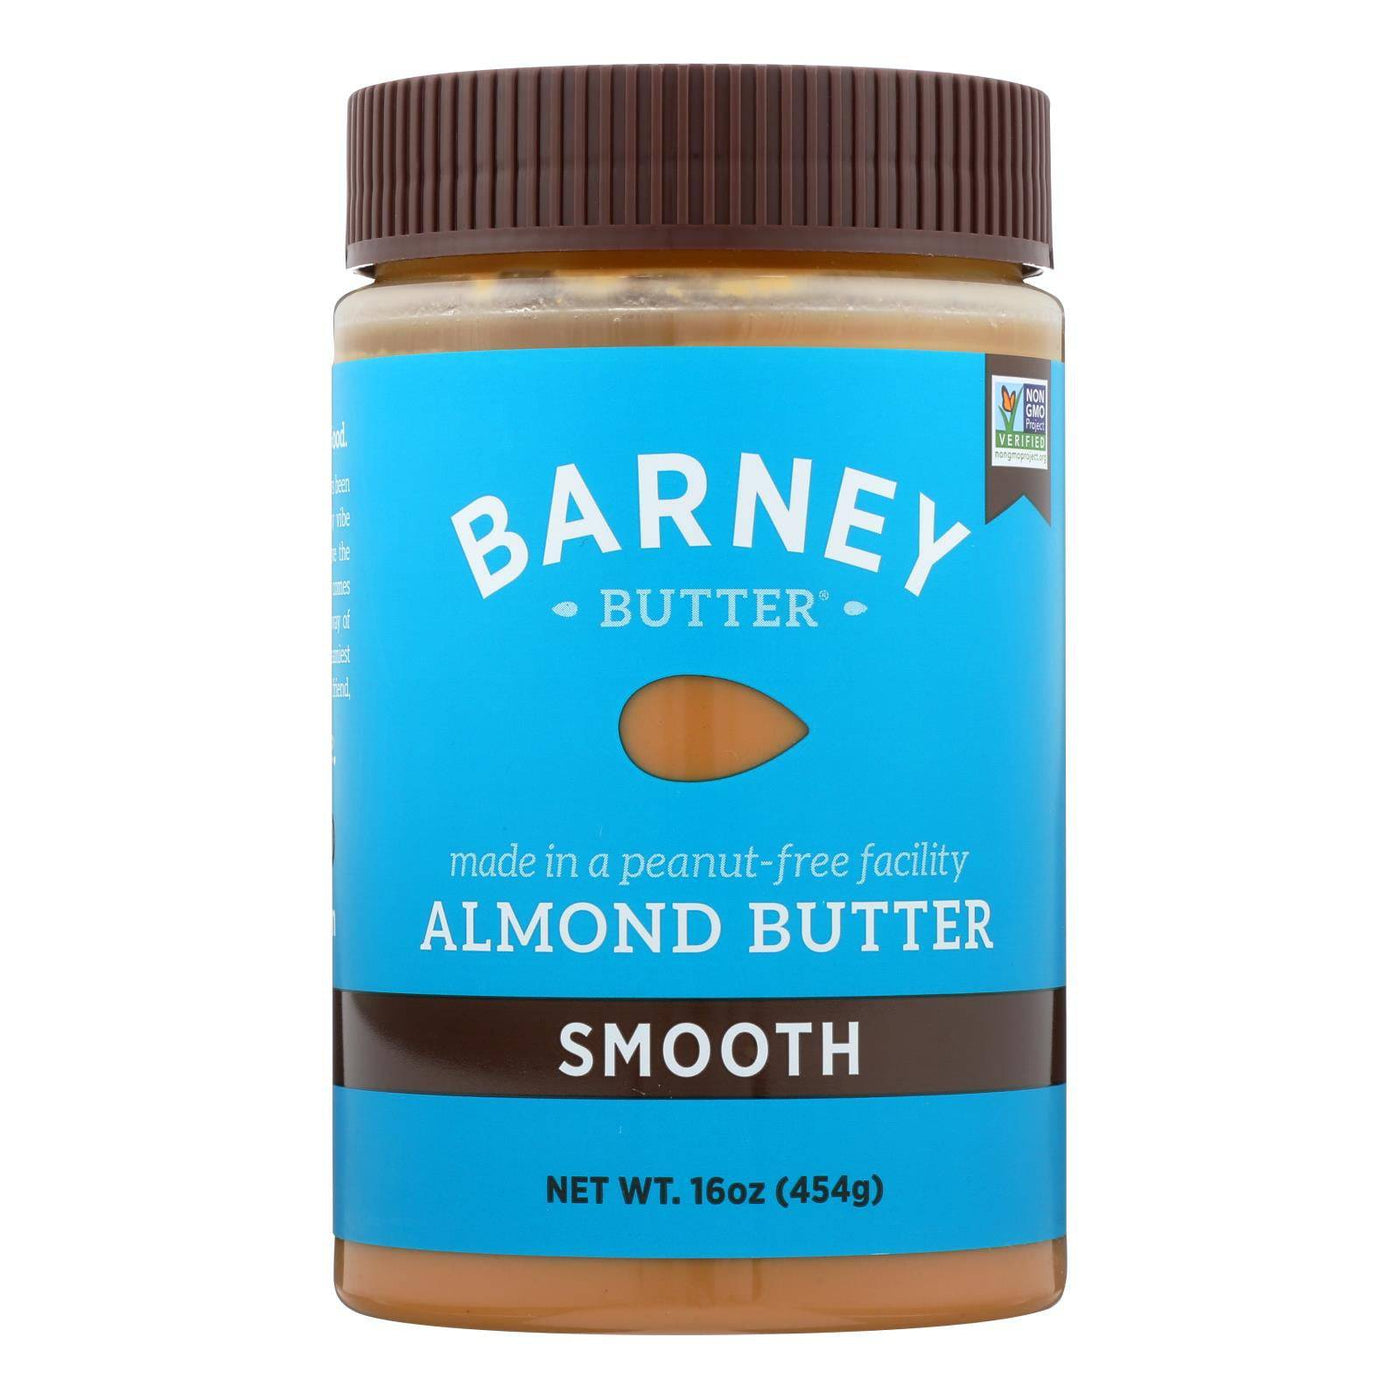 Buy Barney Butter - Almond Butter - Smooth - Case Of 6 - 16 Oz.  at OnlyNaturals.us